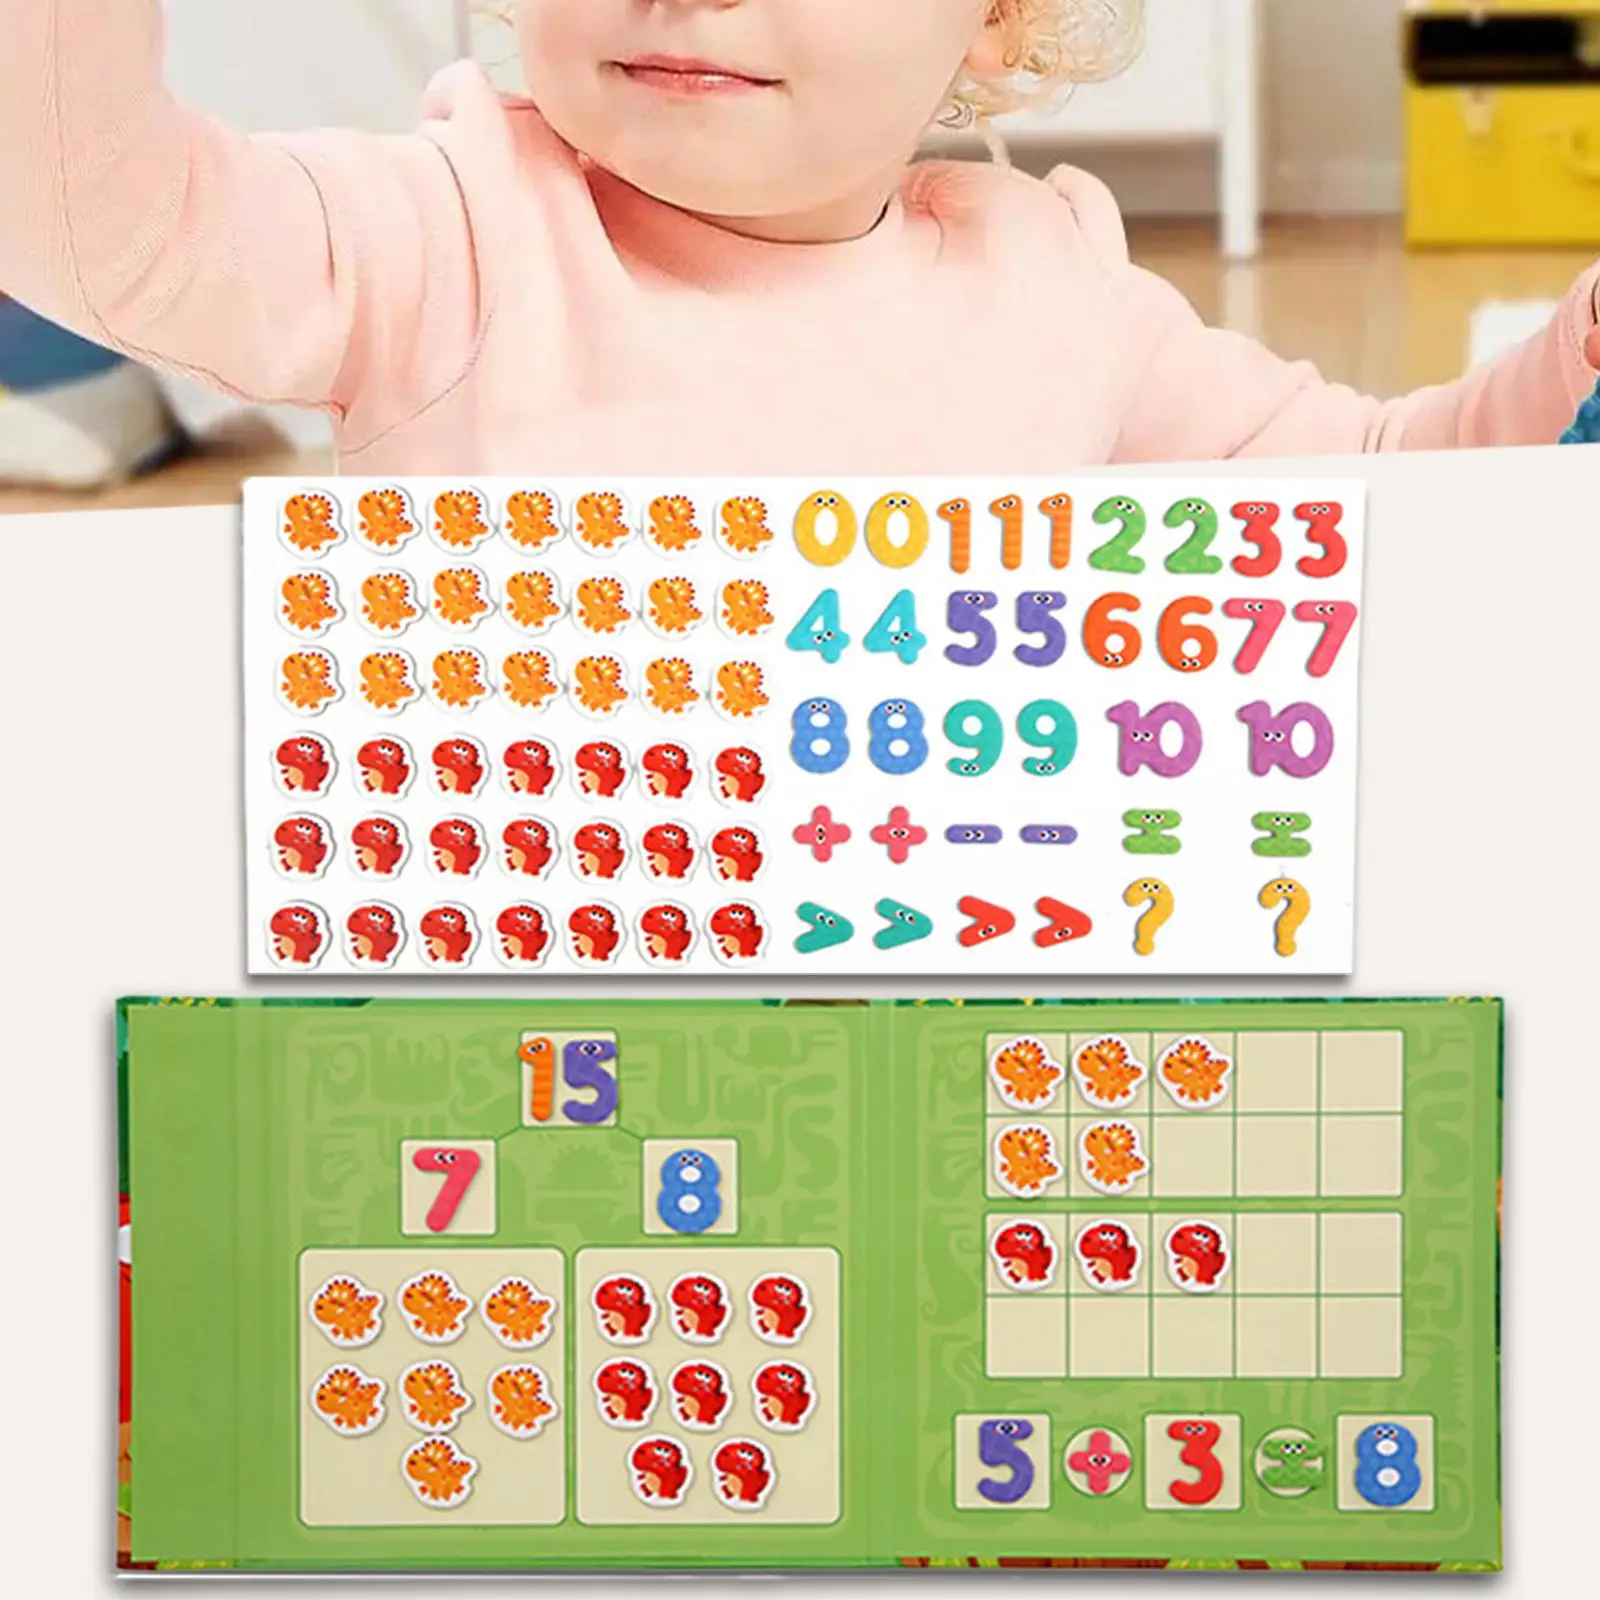 

Ten Frame Set Arithmetic Teaching Aids Educational Toy Number Recognition Math Games for Home Preschool Kids Children Toddlers